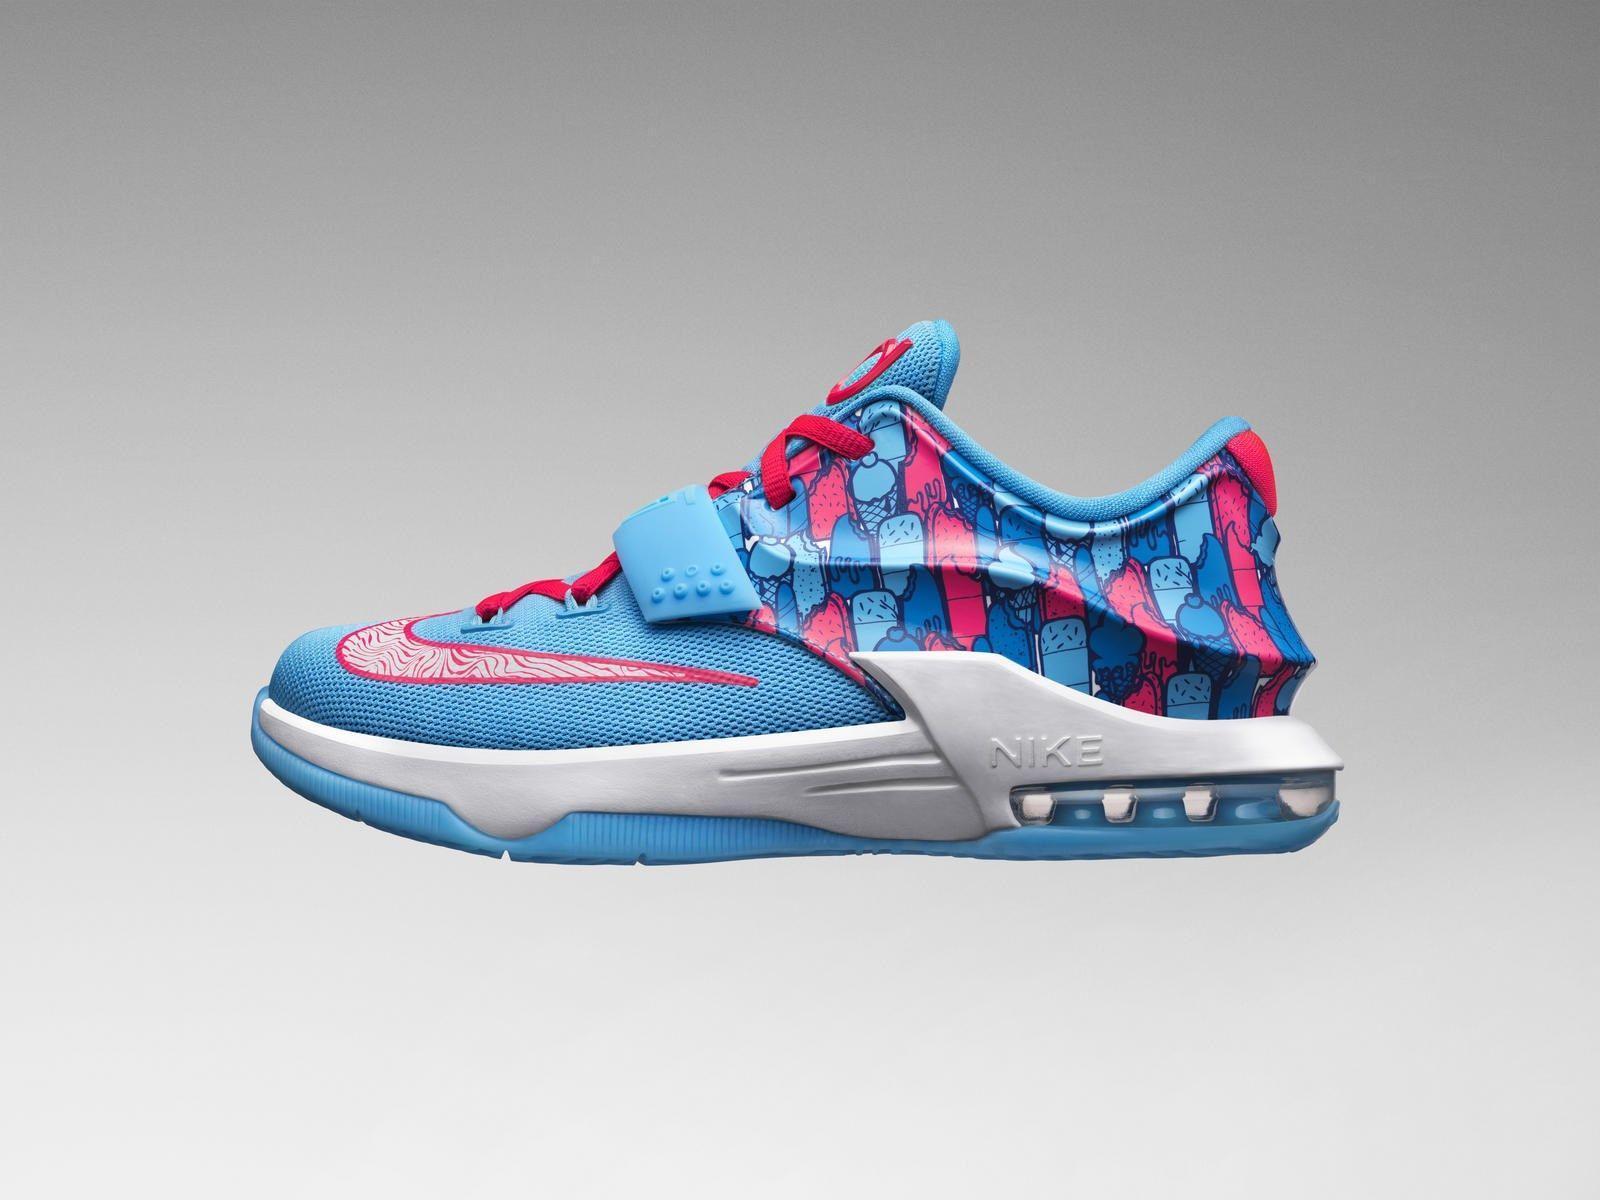 kd 7 wallpaper shoes Wallppapers Gallery